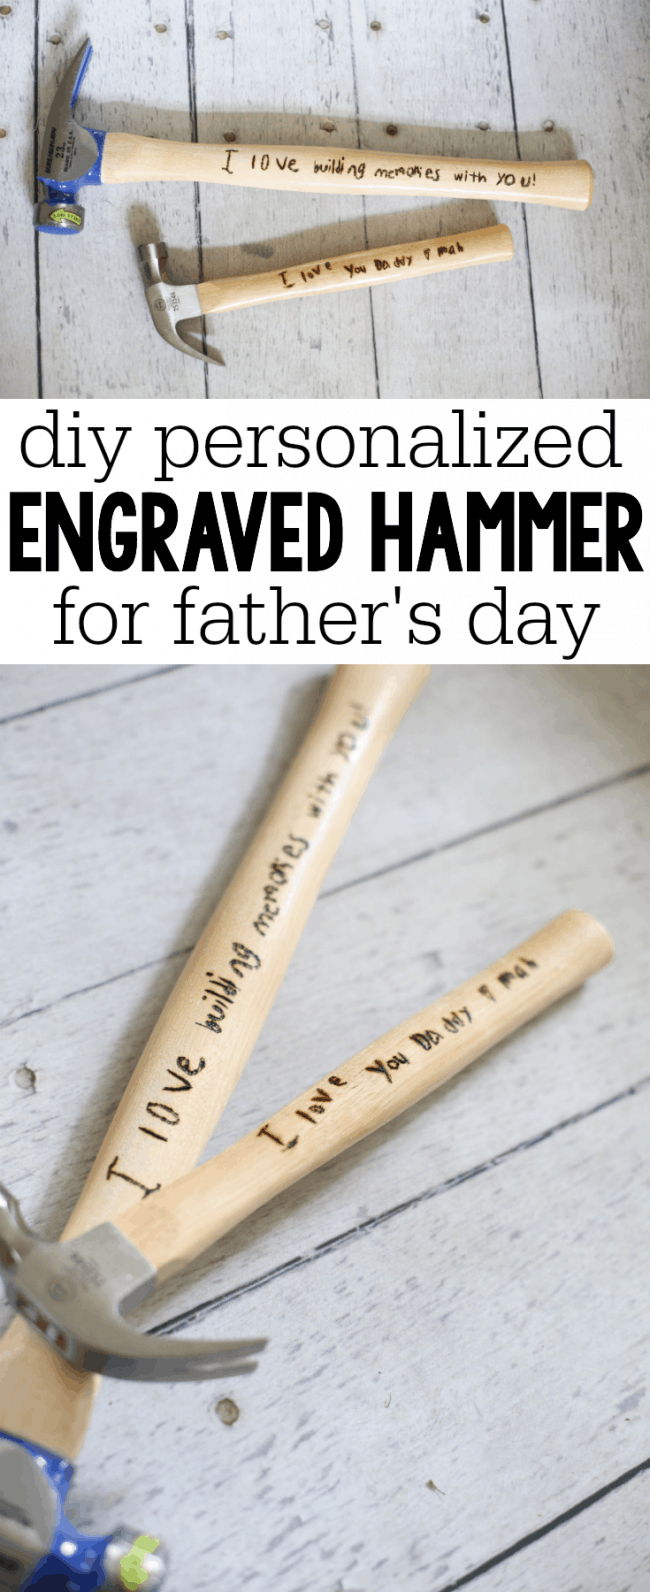 Personalized Engraved Hammer for Dad